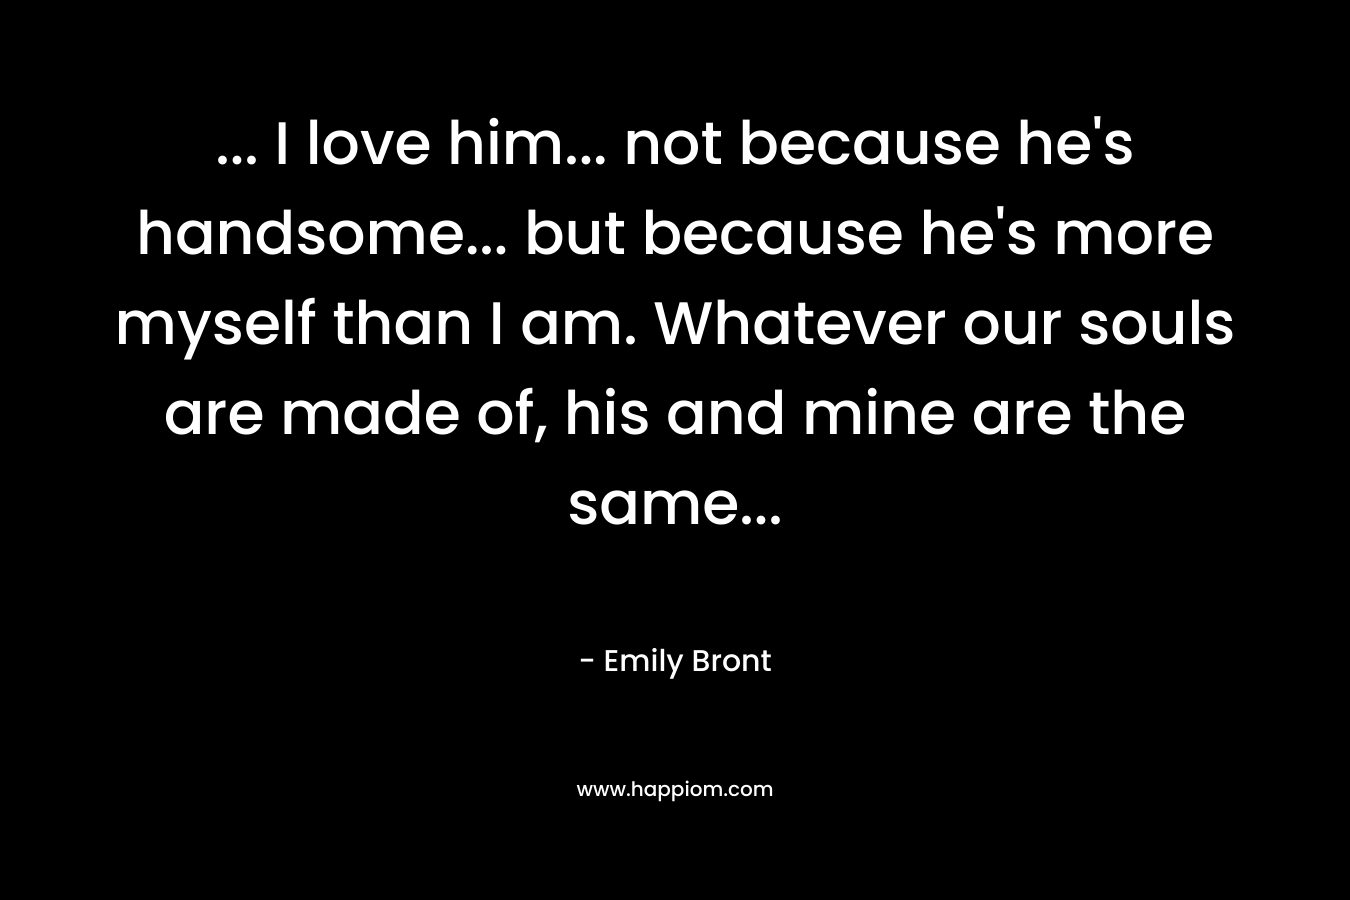 … I love him… not because he’s handsome… but because he’s more myself than I am. Whatever our souls are made of, his and mine are the same… – Emily Bront